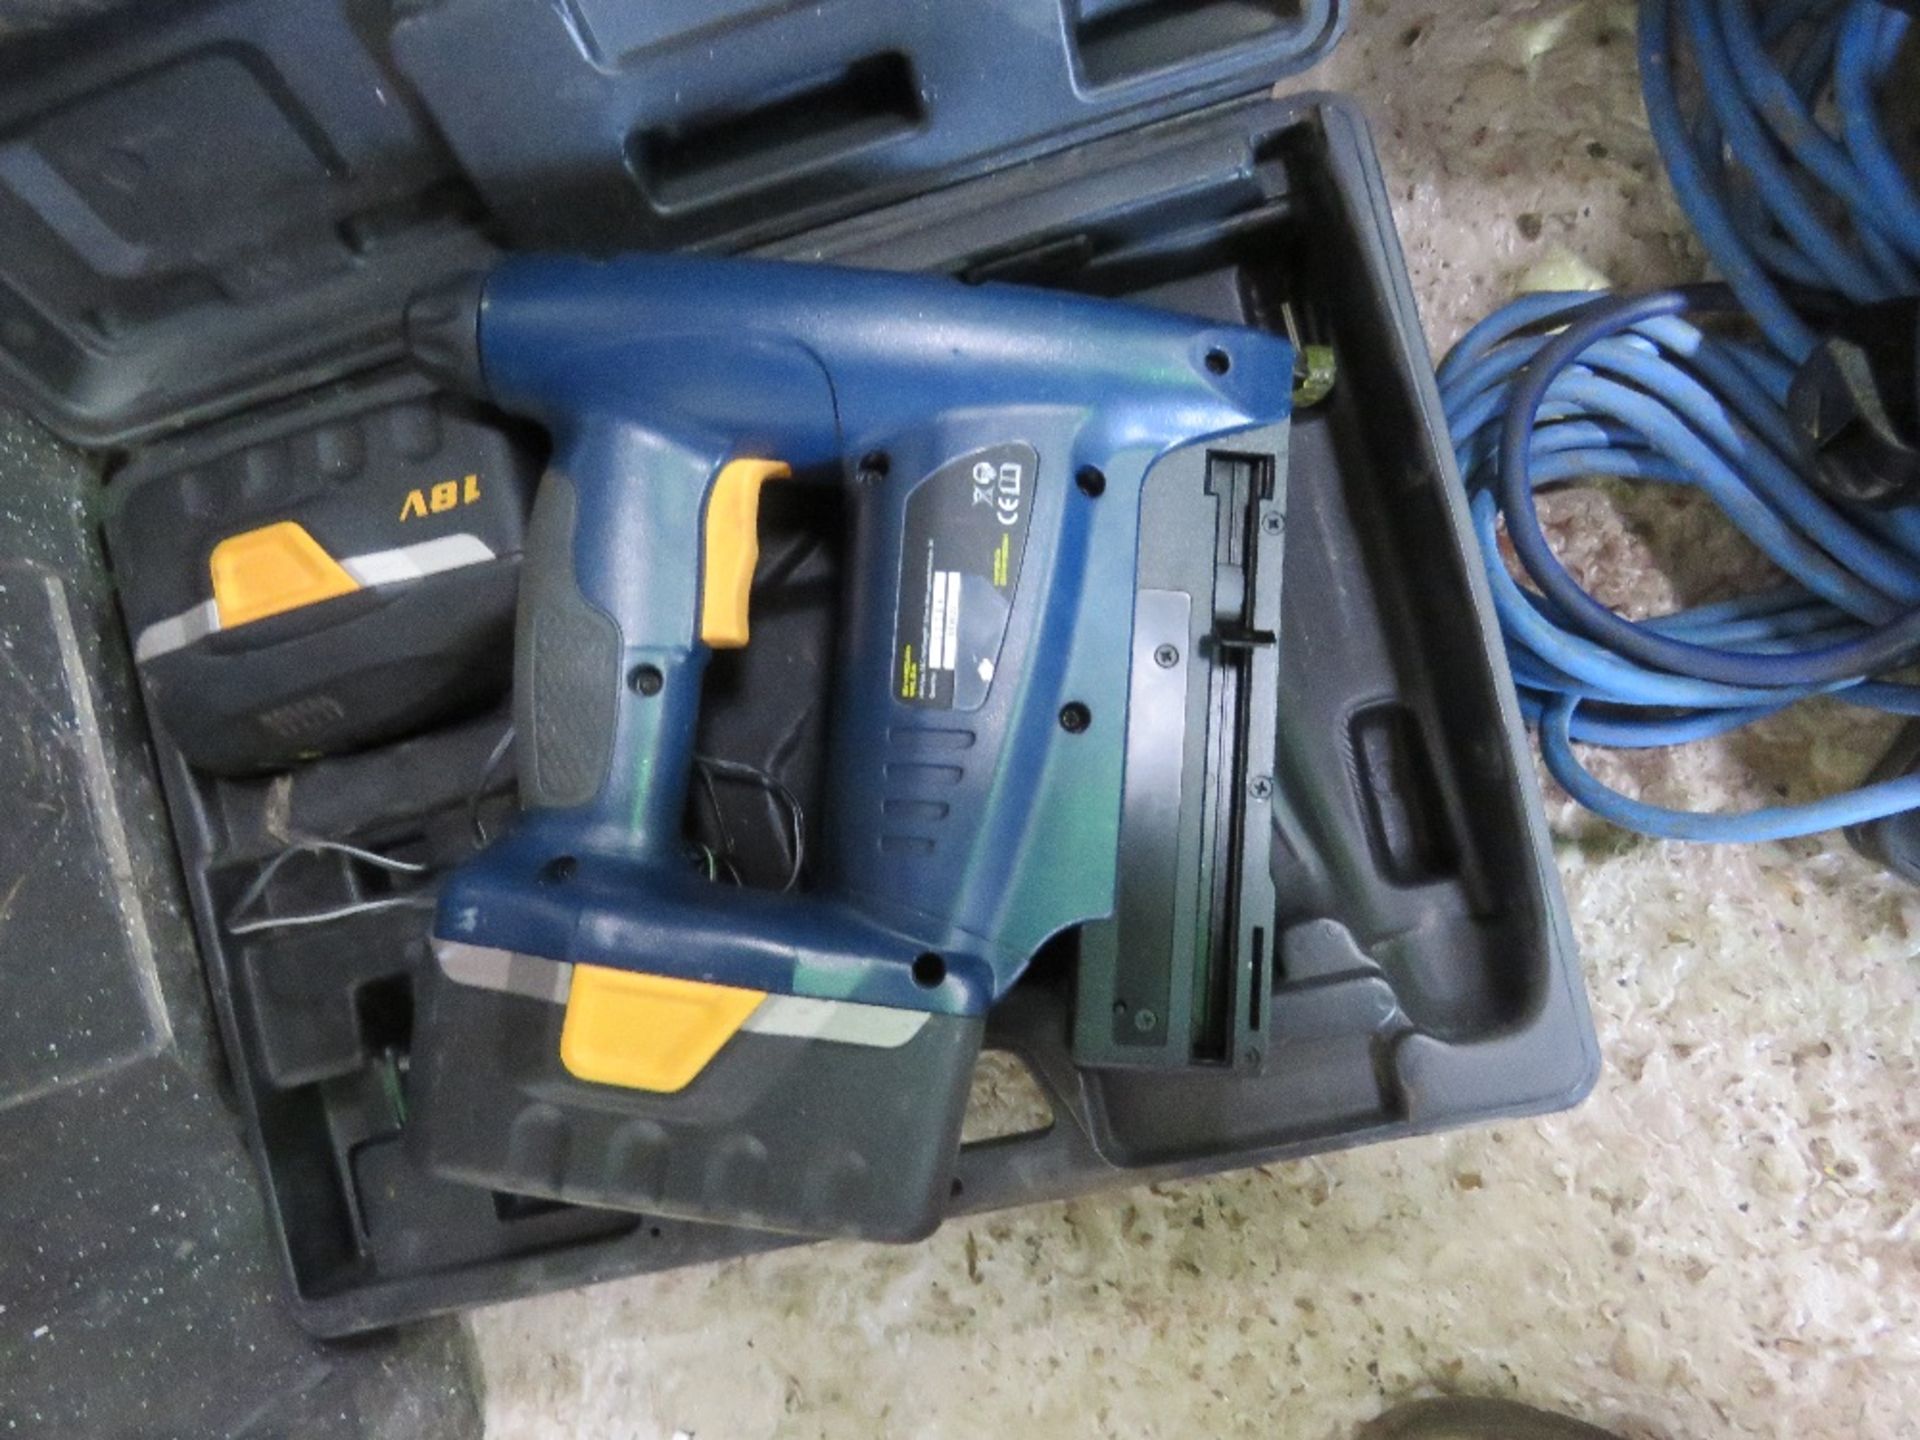 MACALLISTER BATTERY POWERED NAILER/PIN GUN. THIS LOT IS SOLD UNDER THE AUCTIONEERS MARGIN SCHEME, - Image 2 of 3